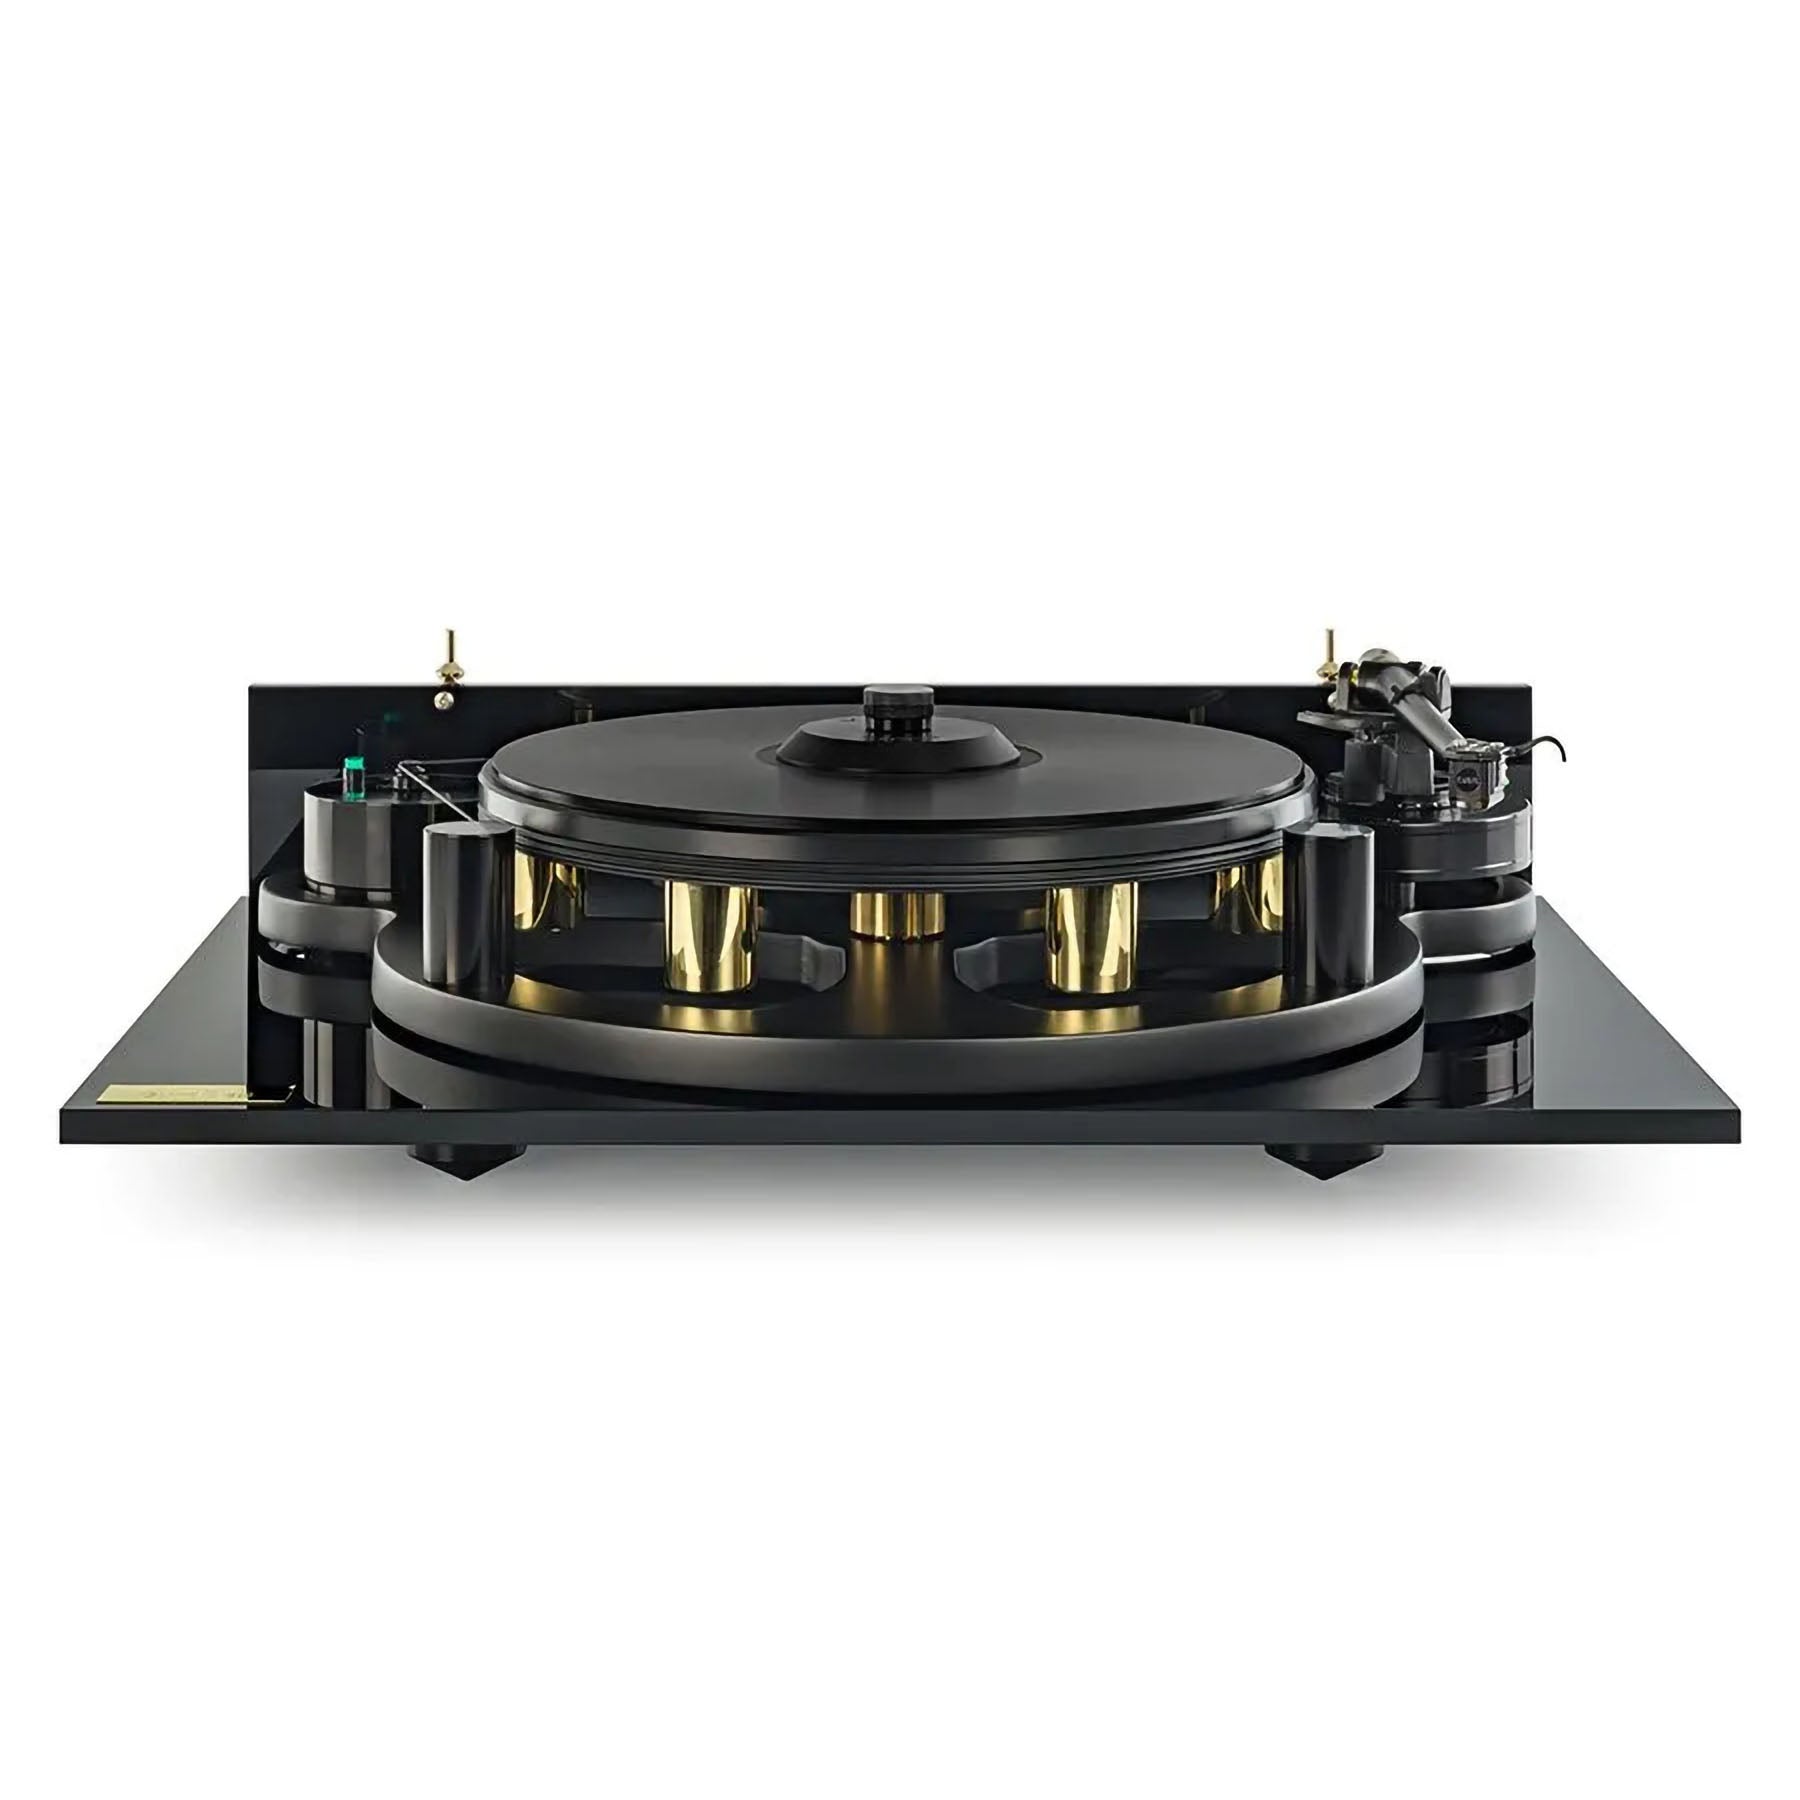 Michell Gyrodec The Classic Michell Turntable